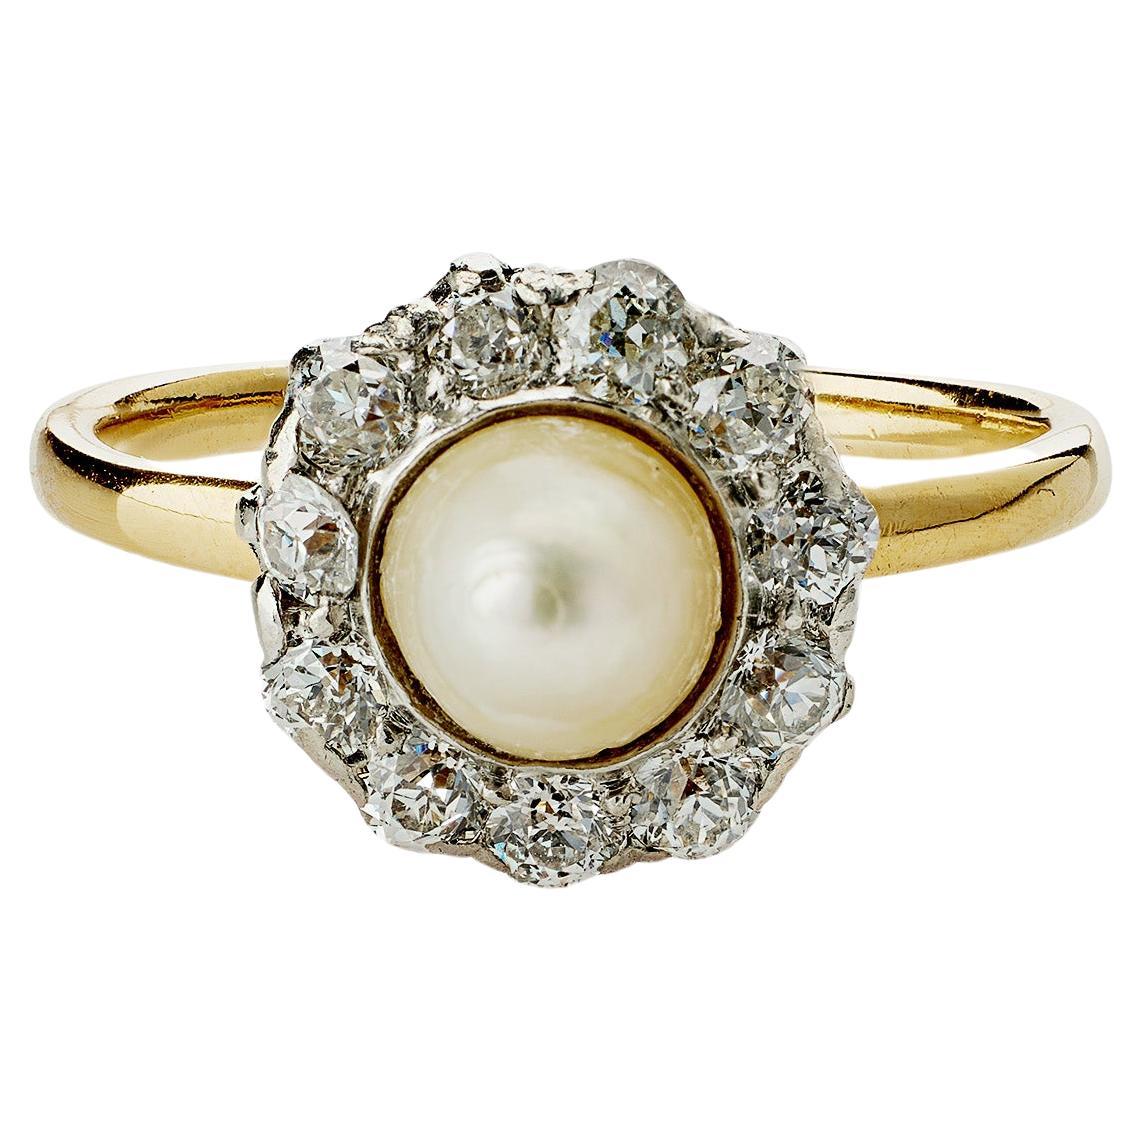 Tiffany & Co. Freshwater Pearl and Diamond Ring